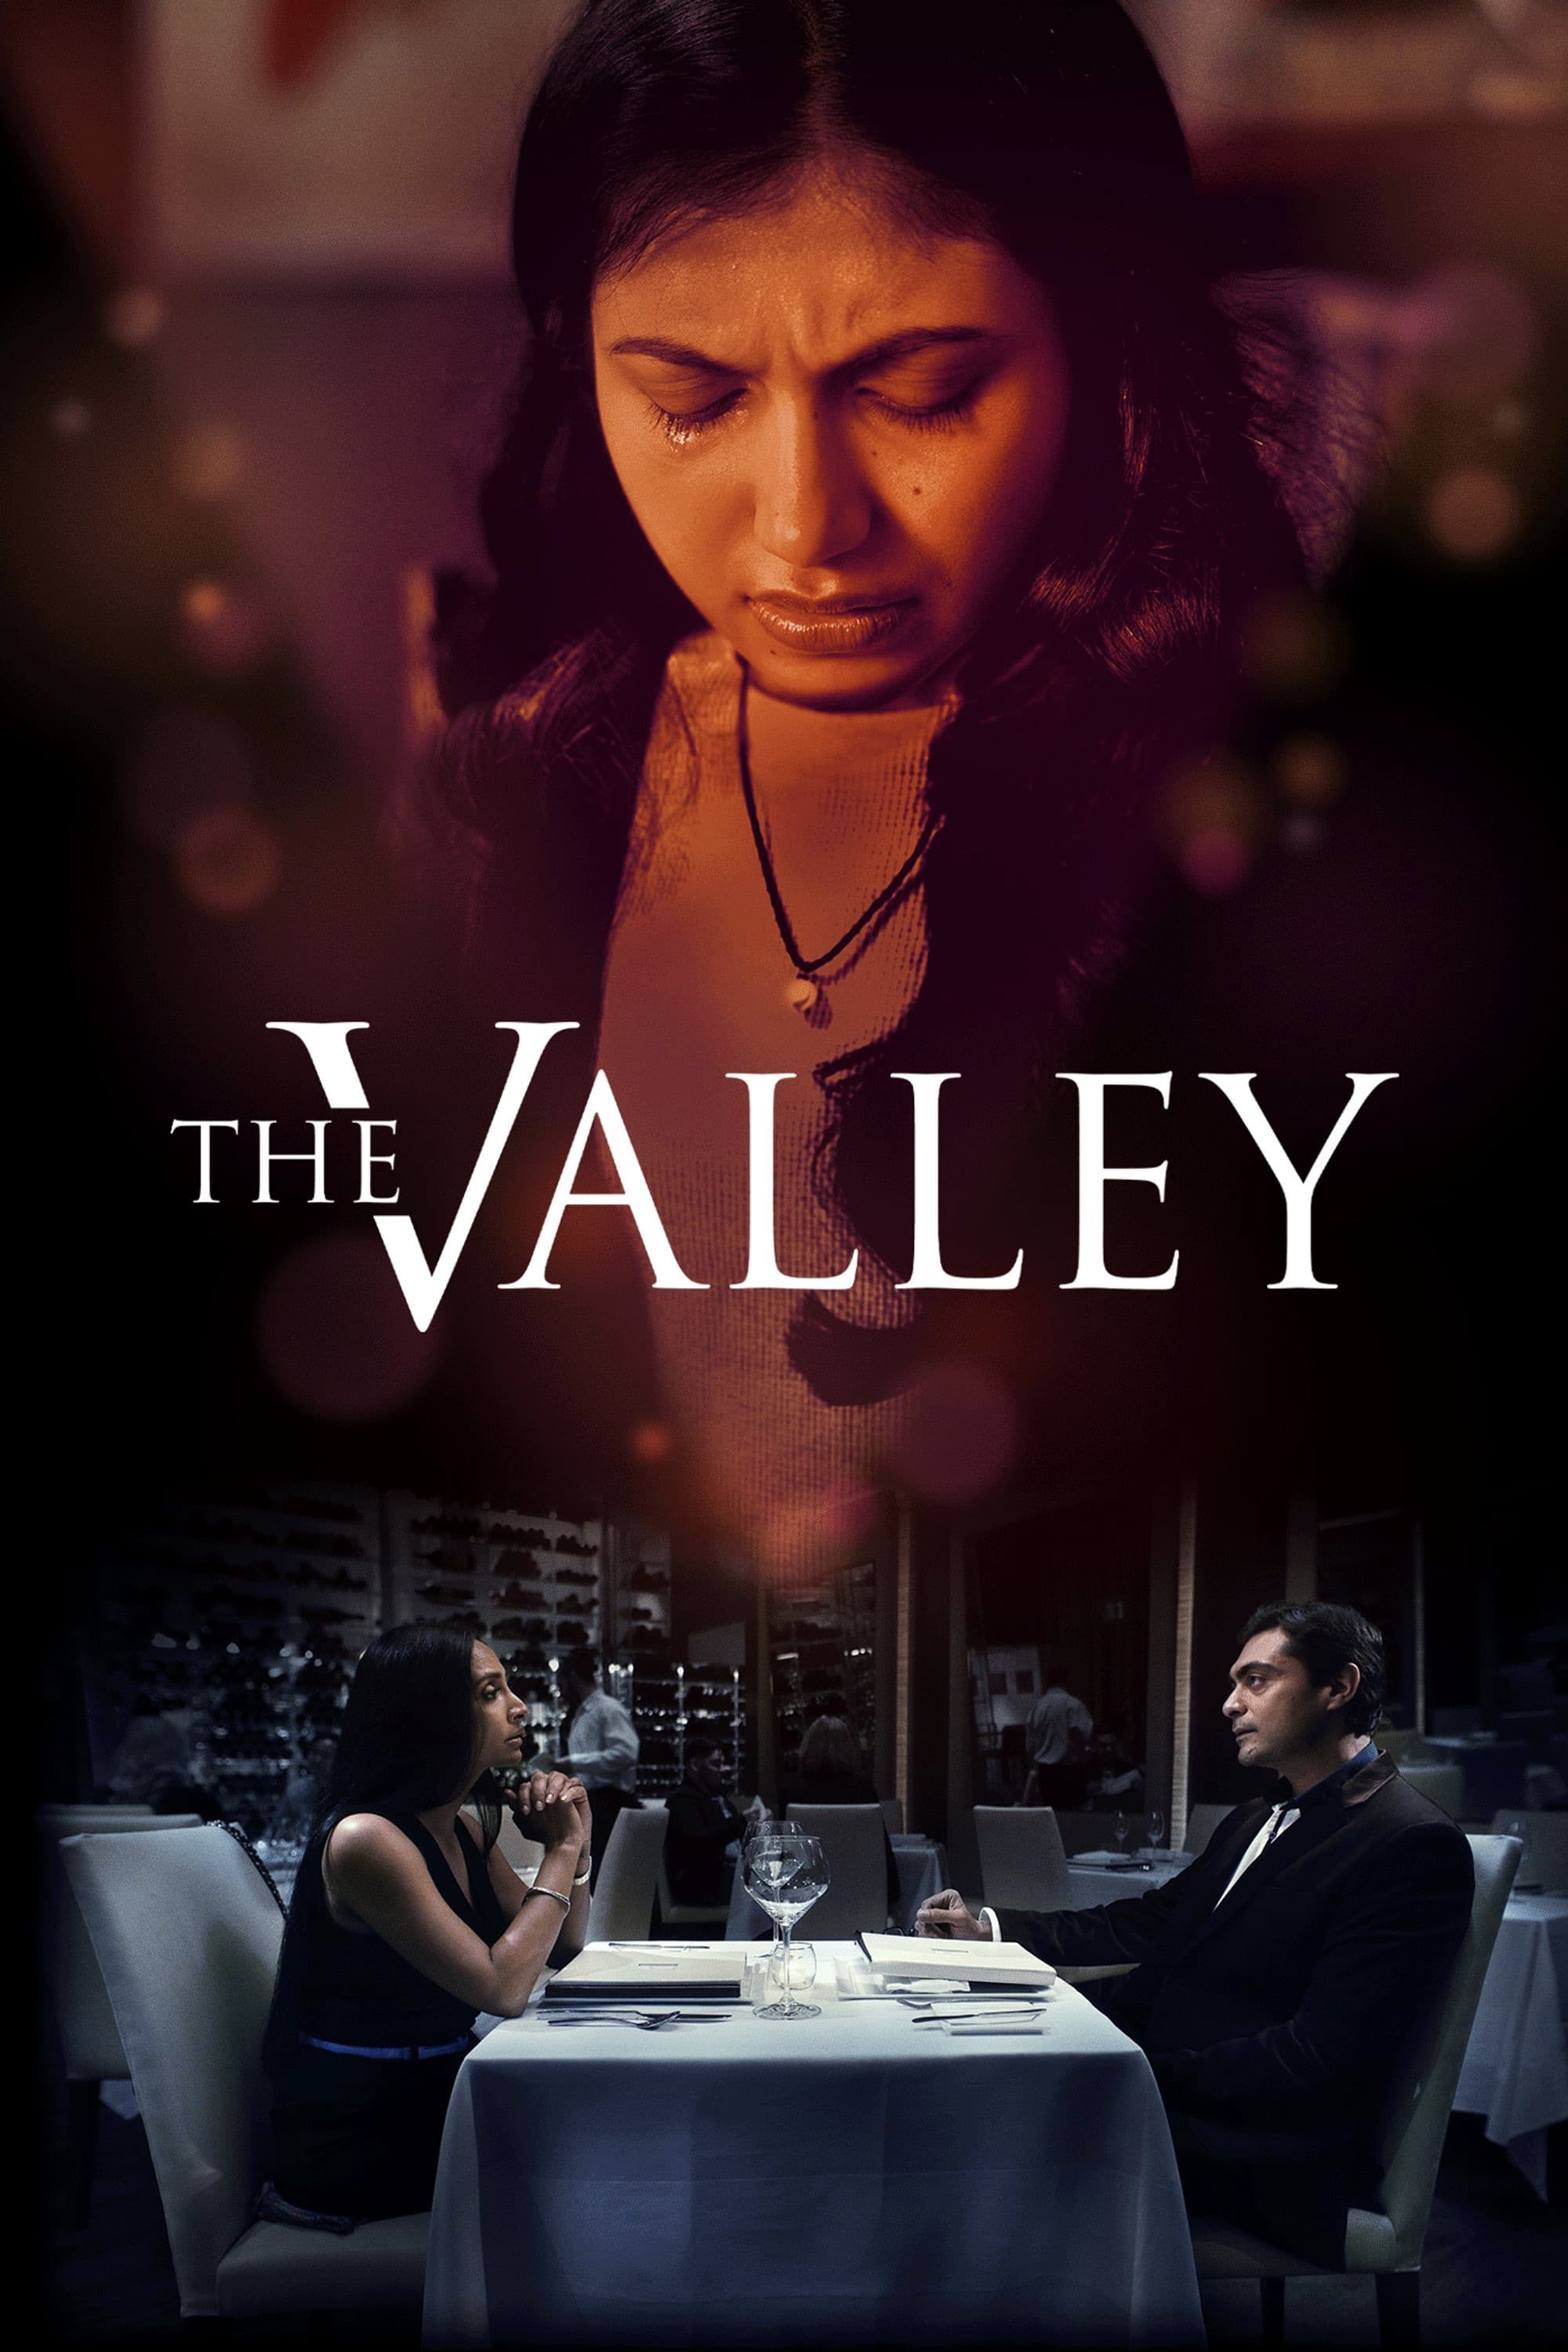 The Valley film